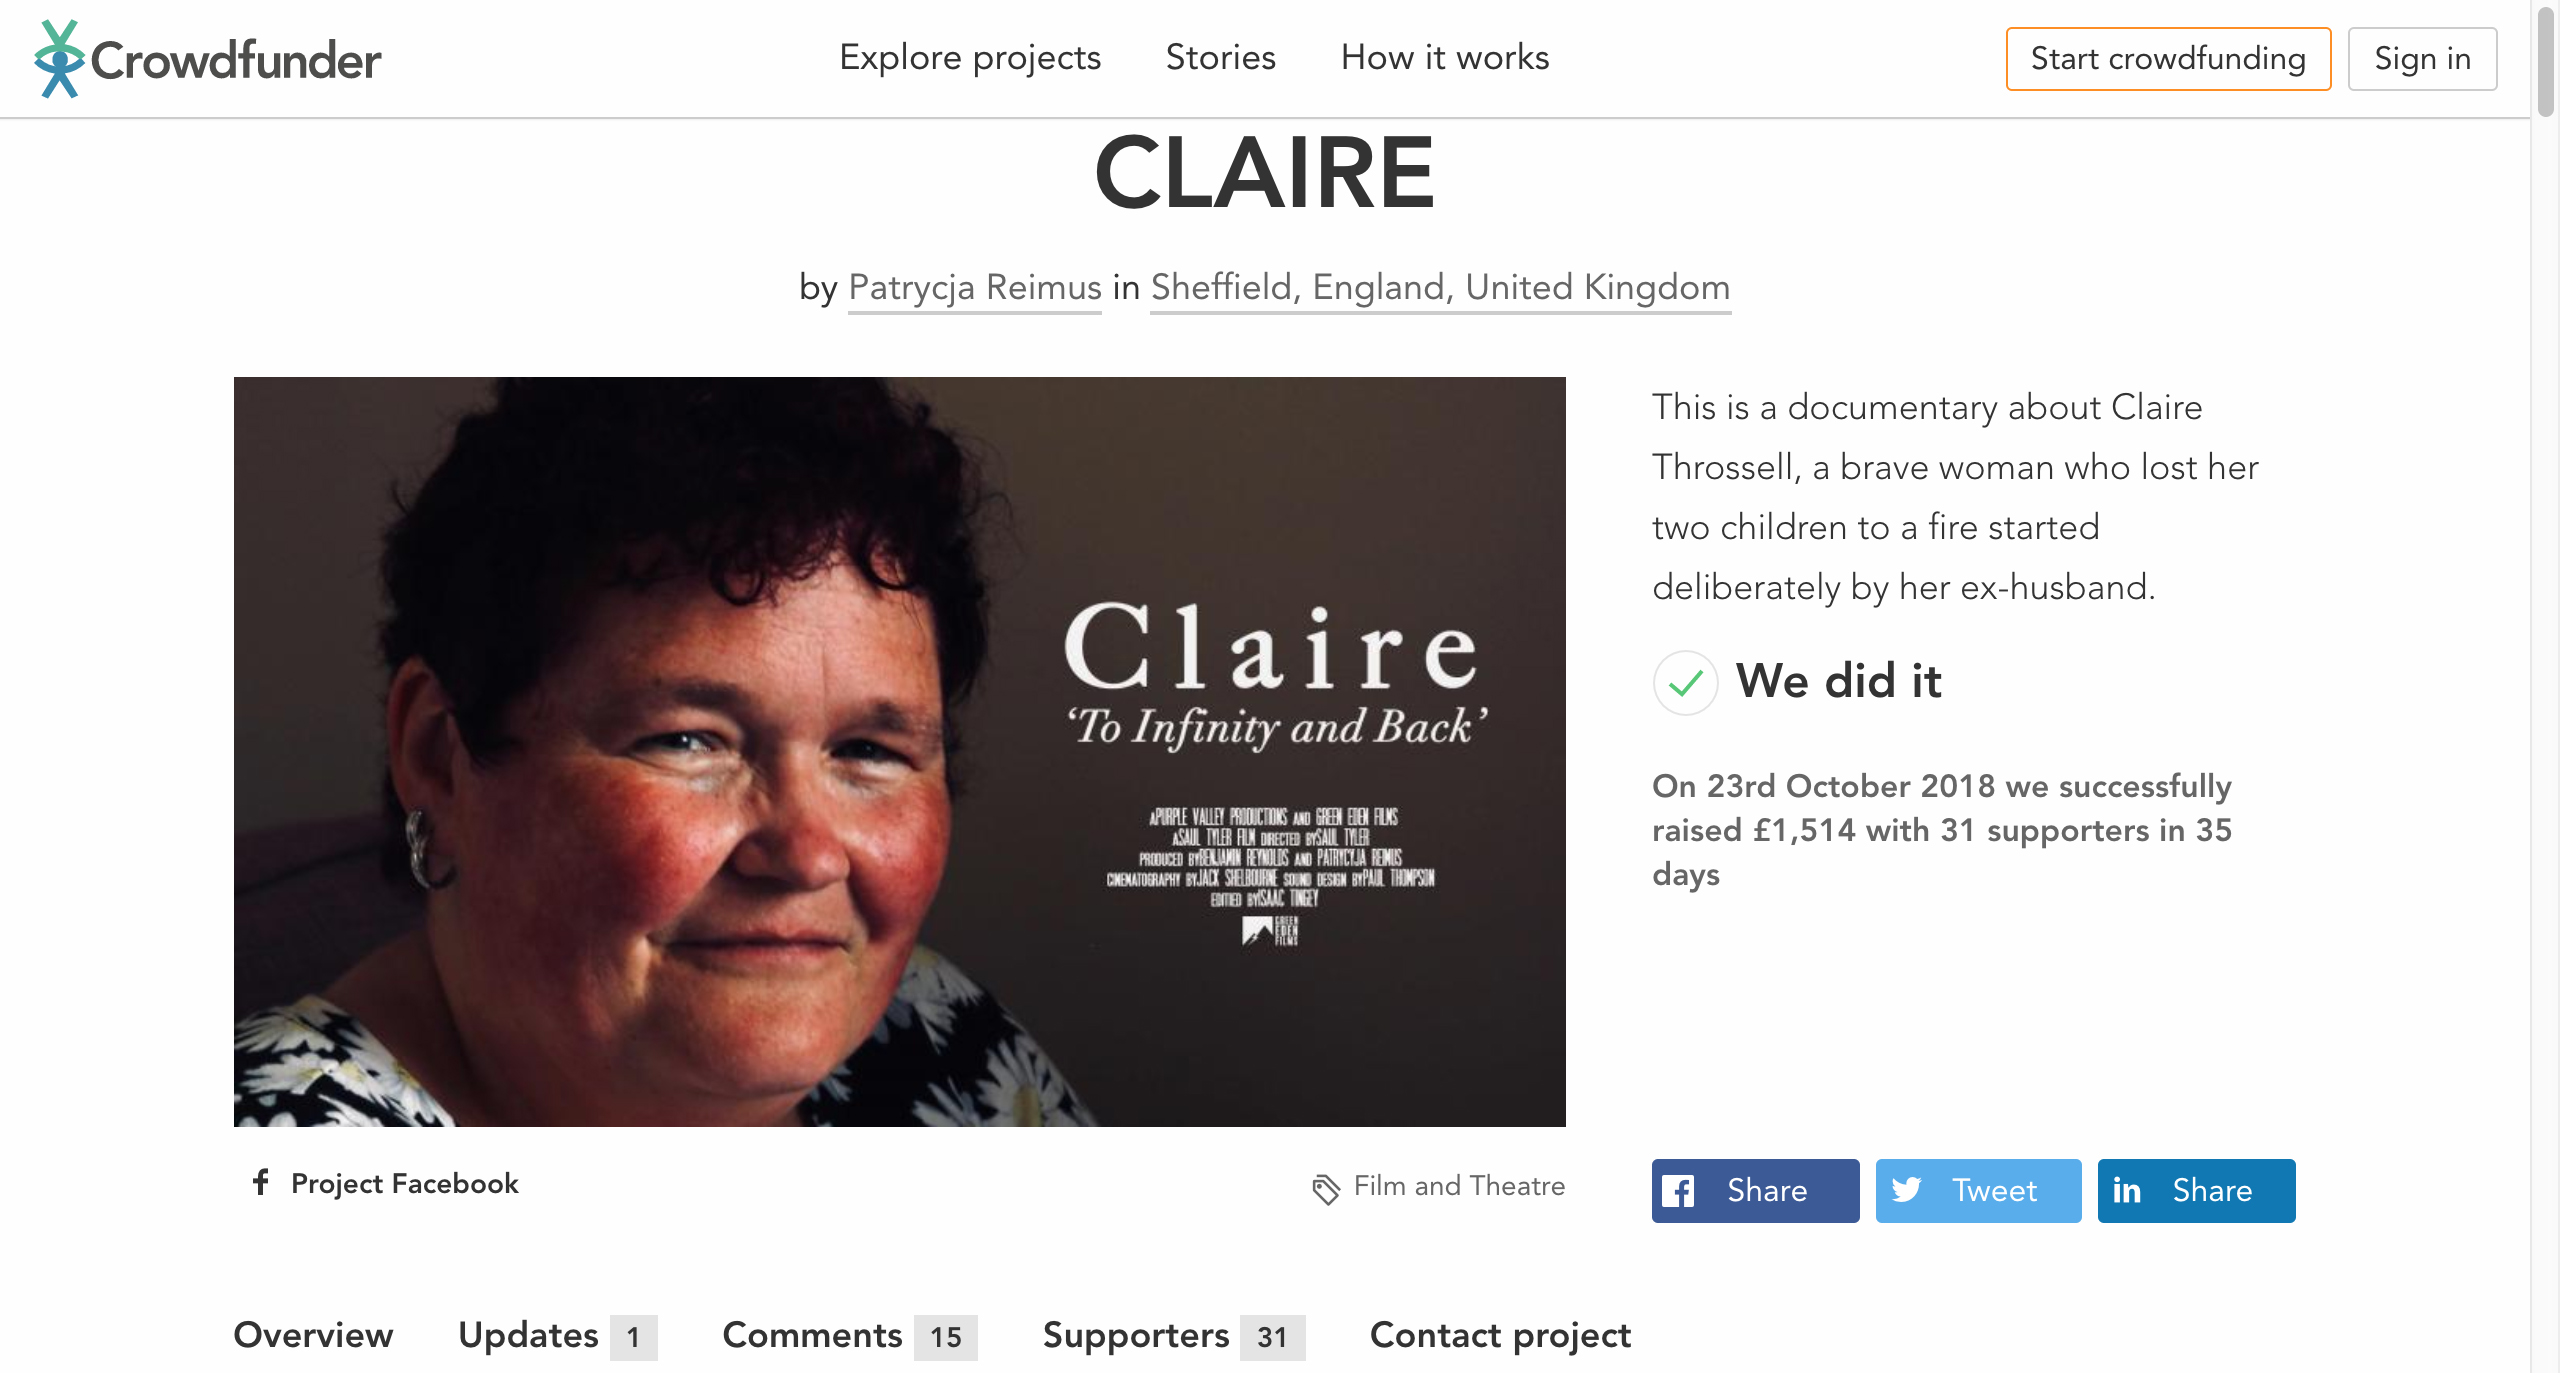 Claire Crowdfunder Page